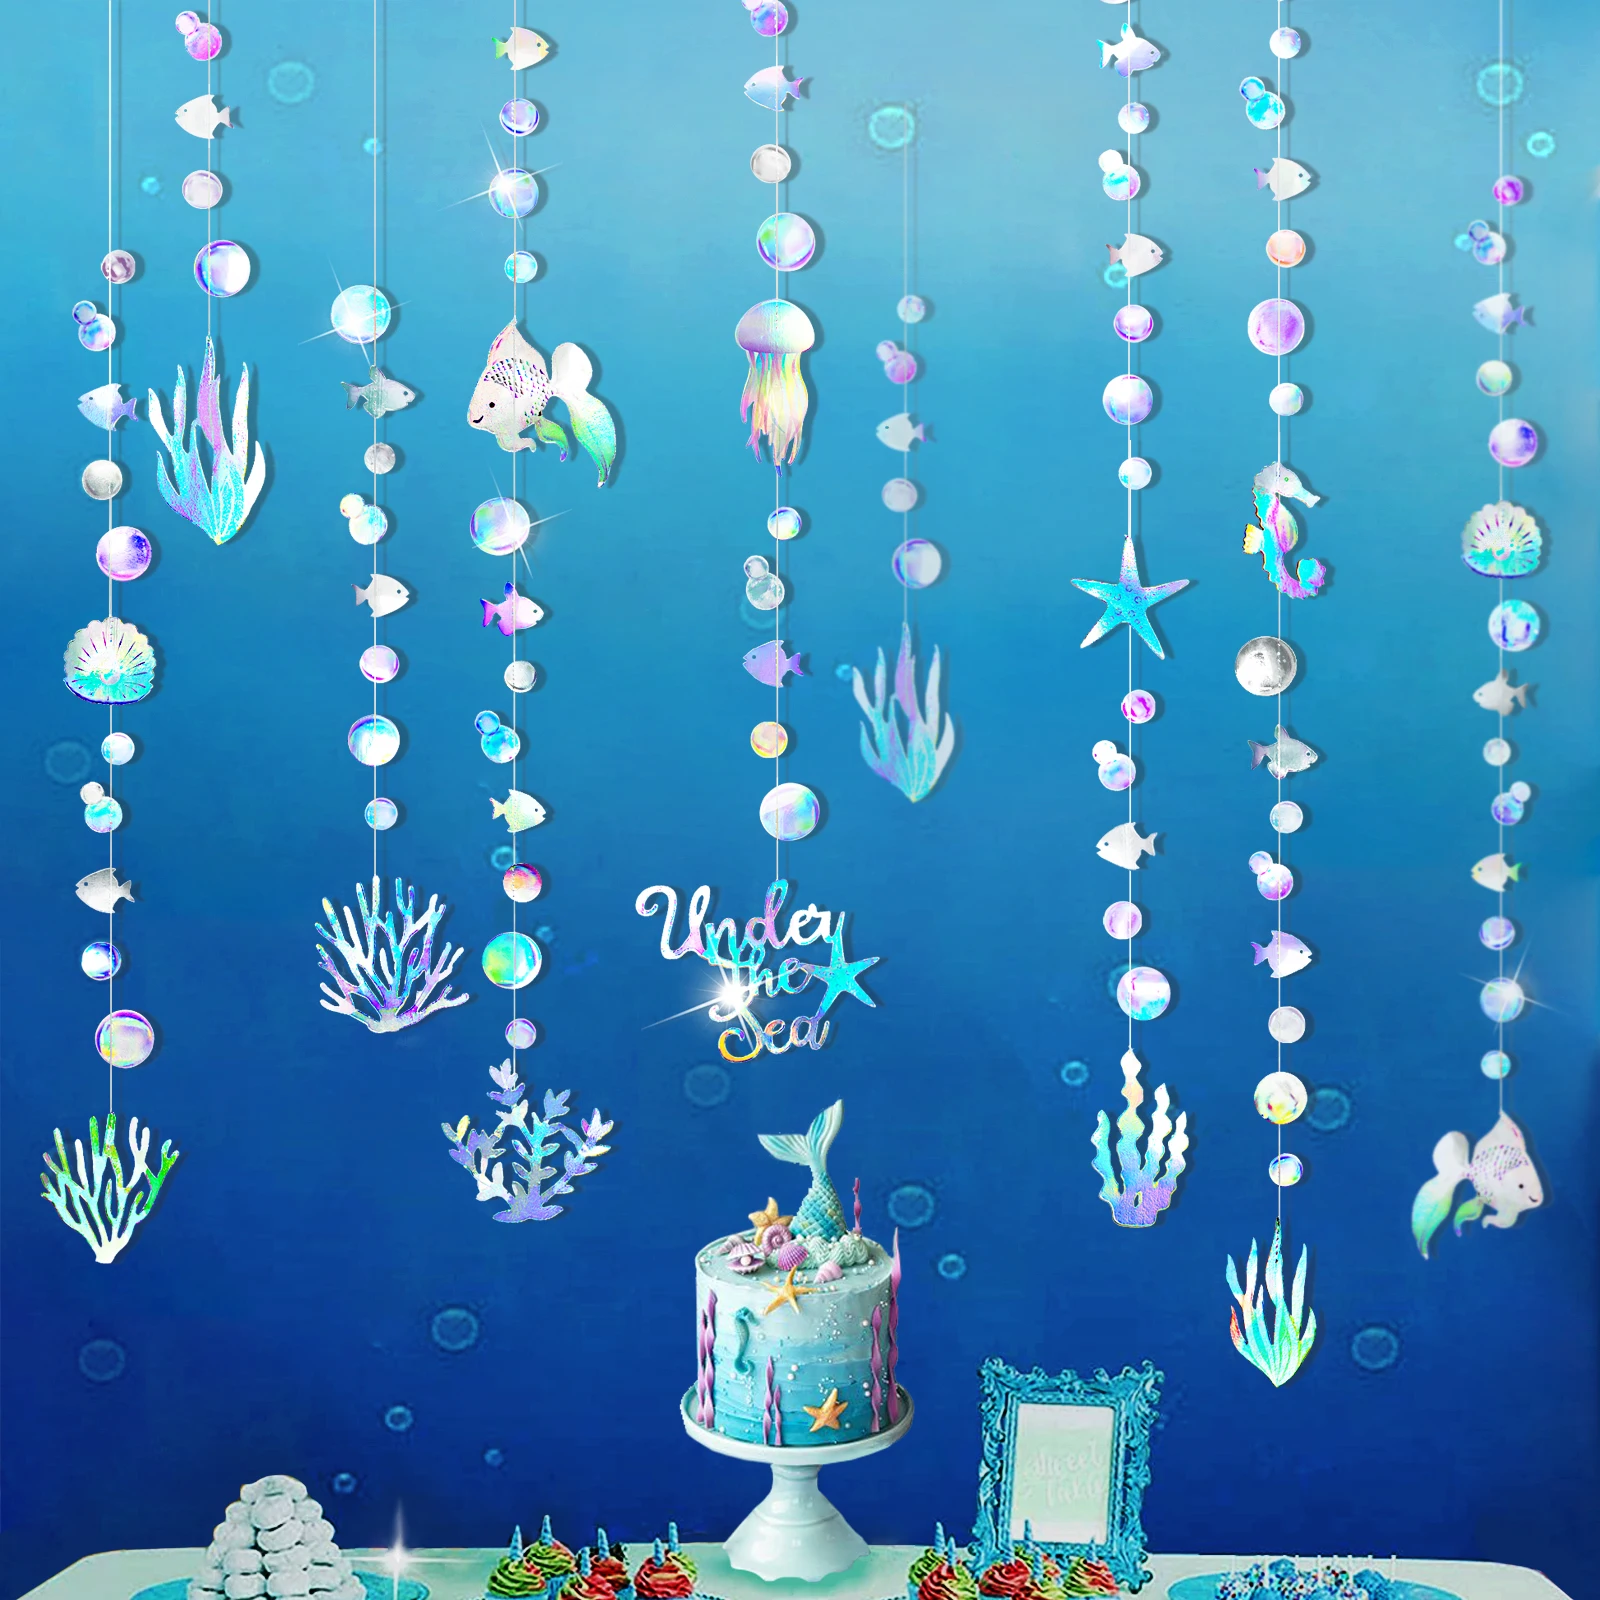 Under the Sea Birthday Themed Party Decorations Seashell Starfish Seaweed  Seahorse Table Ornaments Baby Shower Hanging Garlands